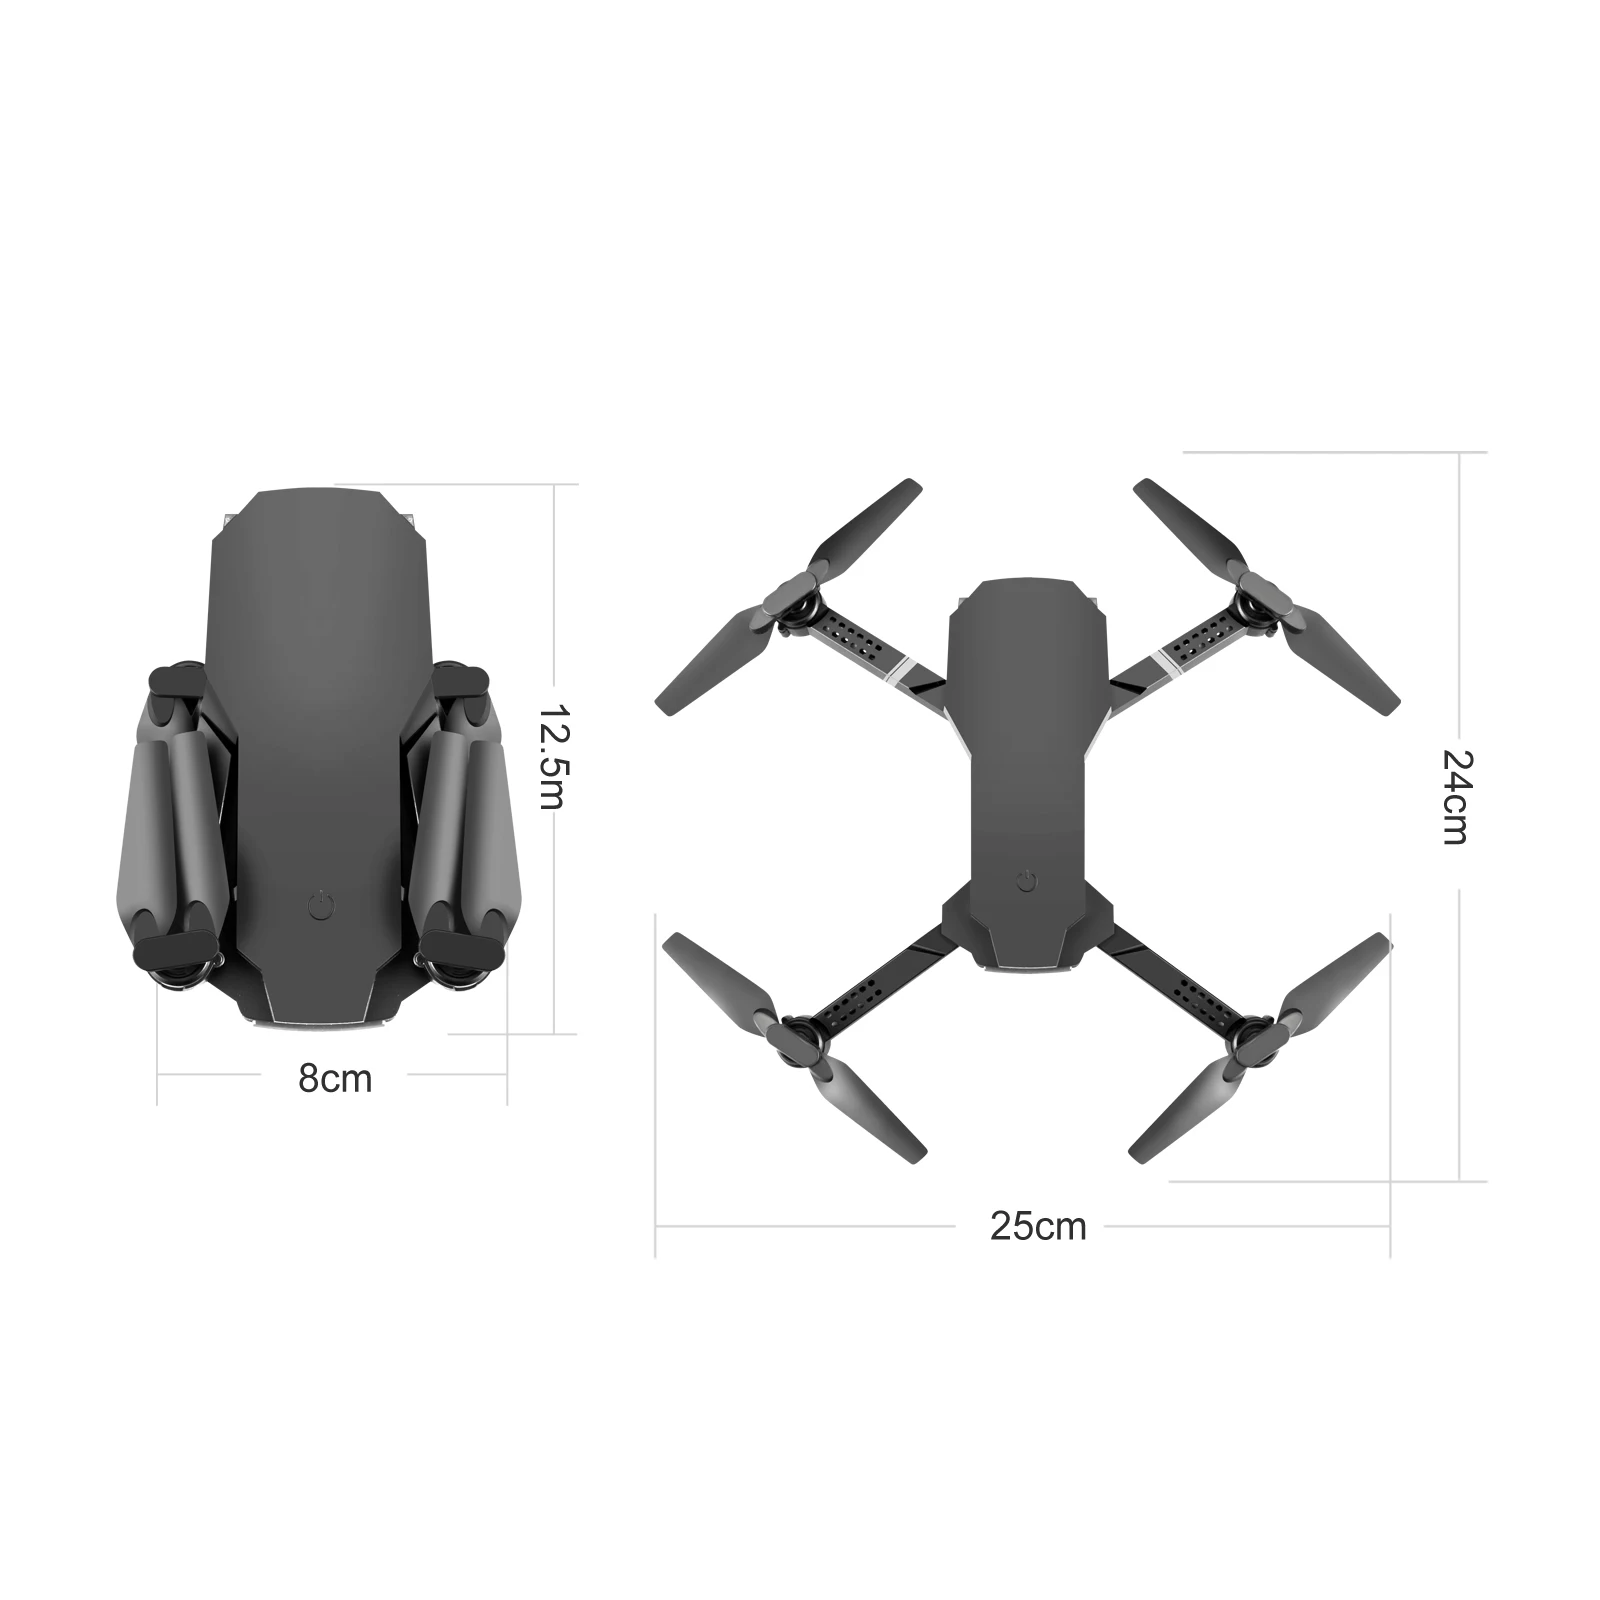 

2021 New S70 Drone profession 4K HD Dual Camera Drone Helicopter WiFi FPV 1080P Real-Time Transmission RC Quadcopter toy Drone